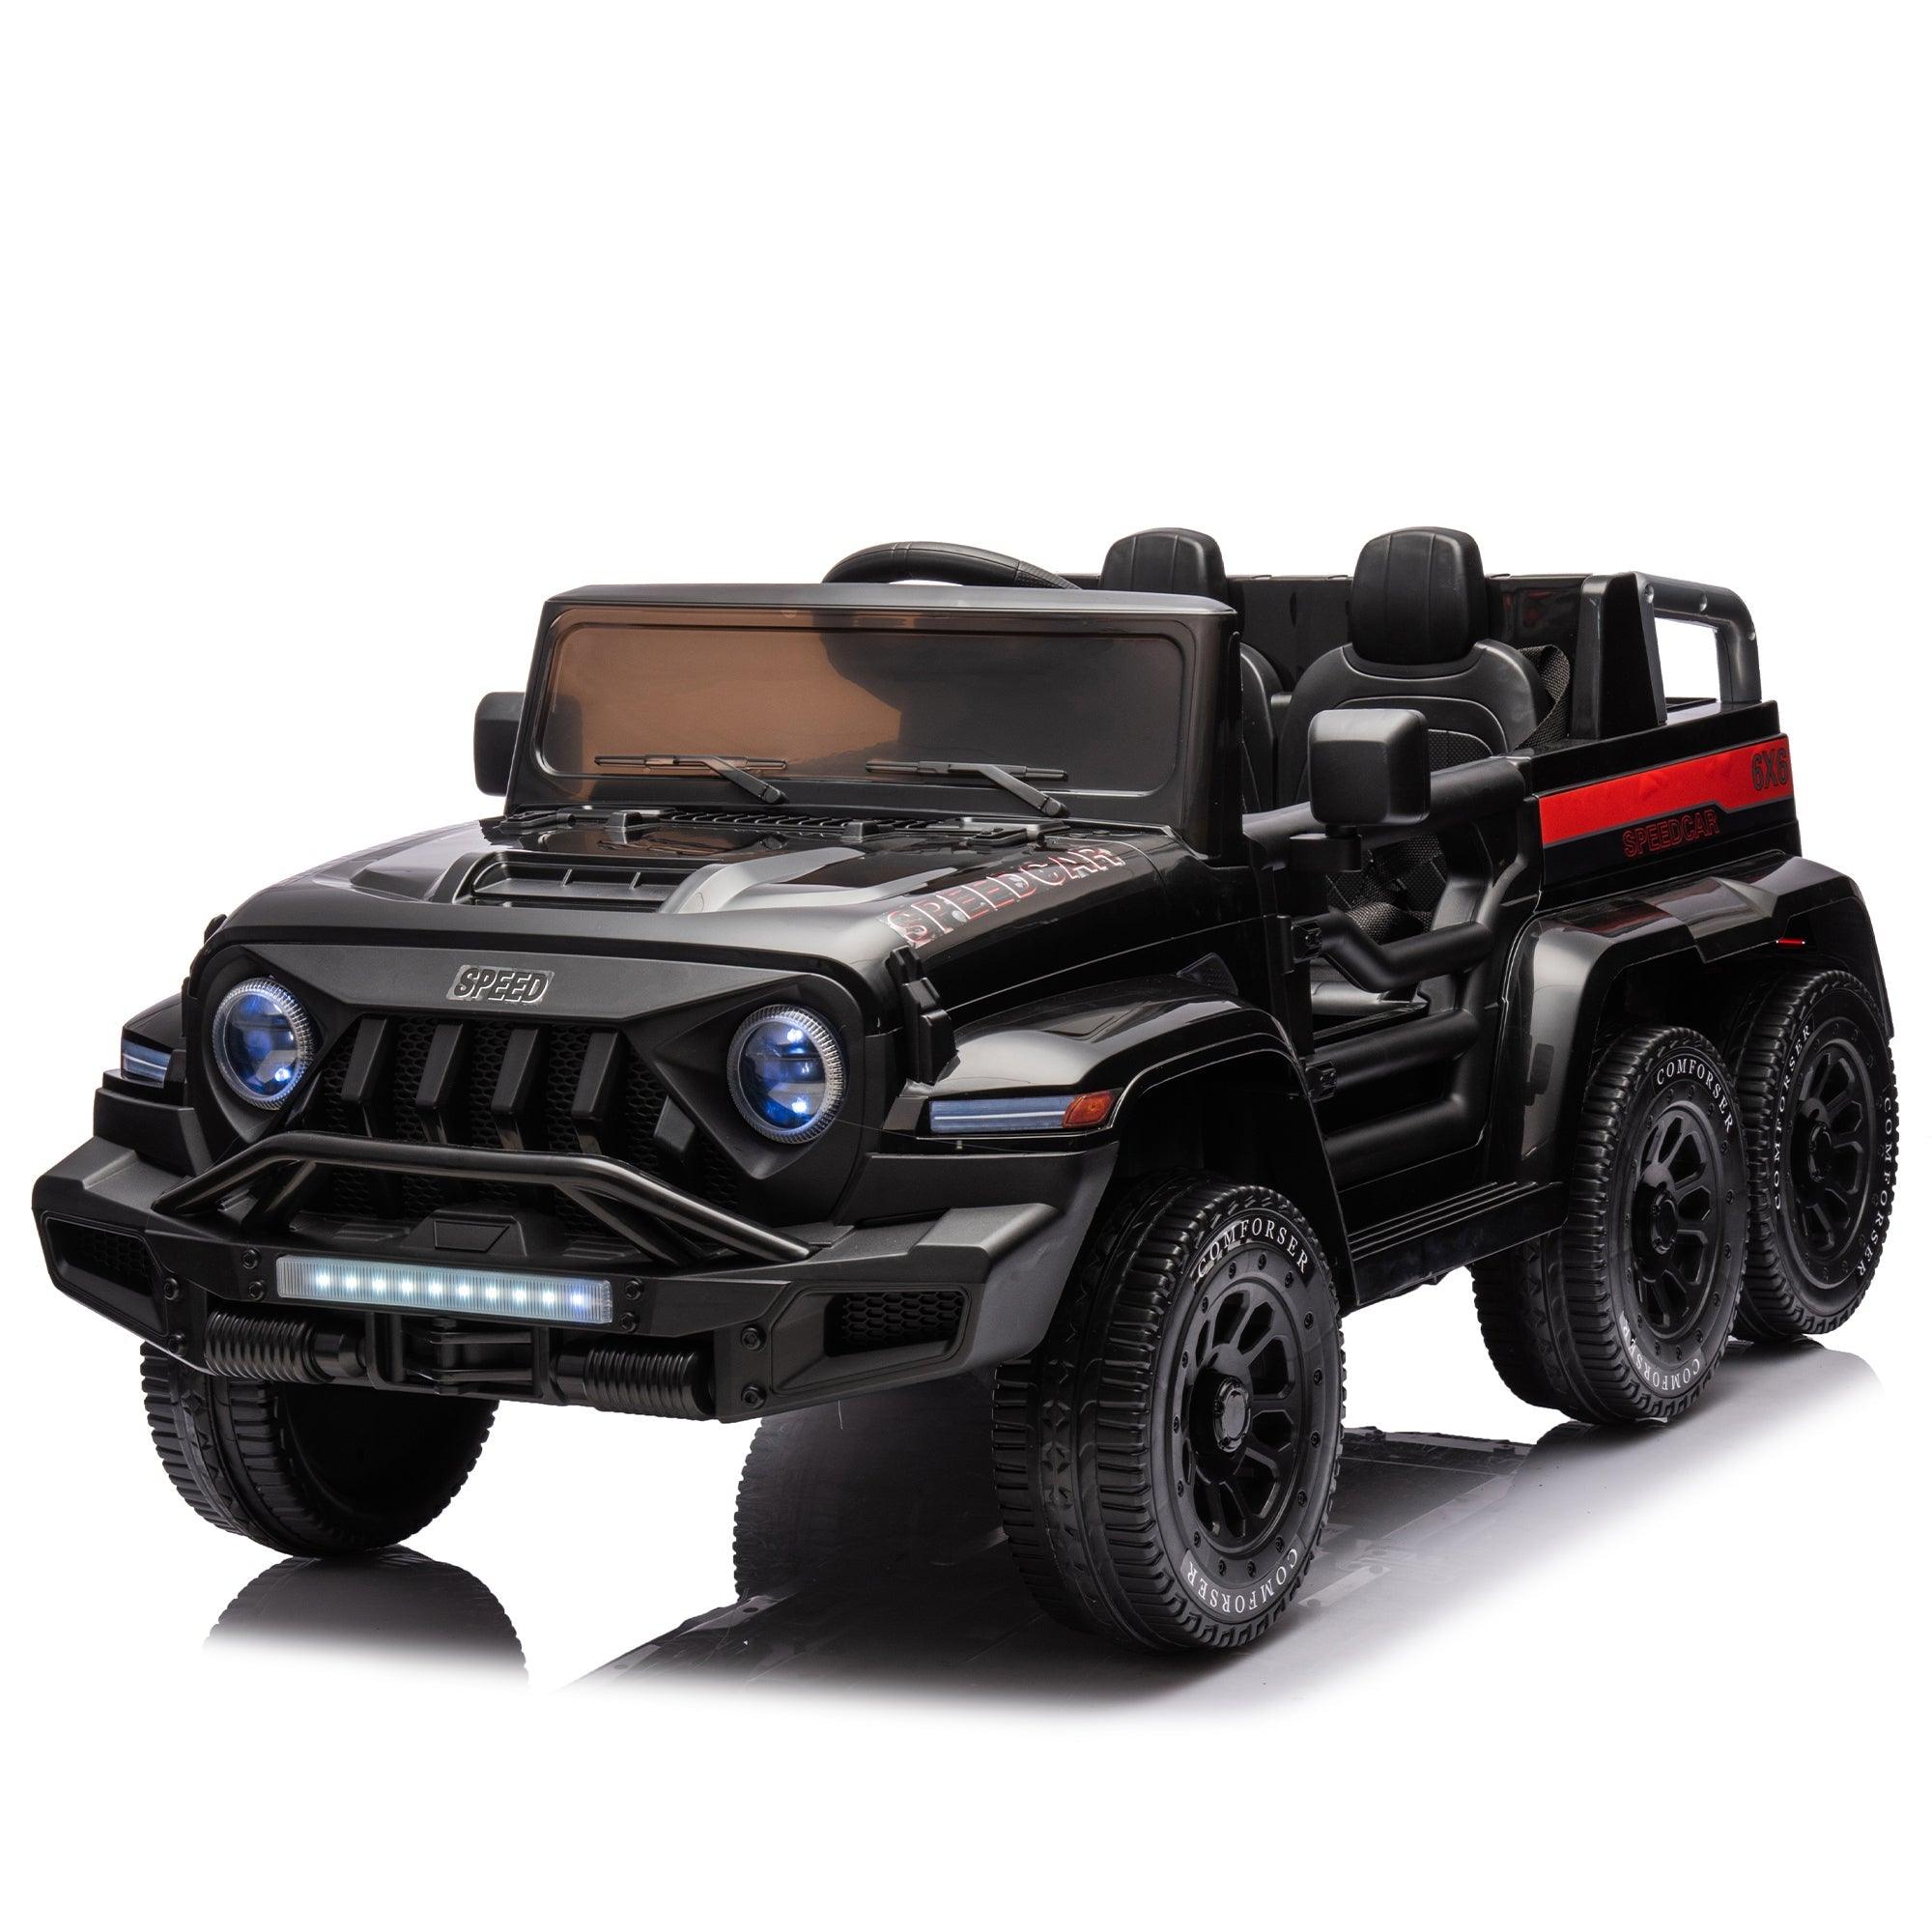 24V Ride On Car for Kids Battery Powered Ride On 4WD Toys with Remote Control, Parents Can Assist in Driving, Music and Lights, Five-Point Safety Belt, Rocking chair mode for back-and-forth swinging LamCham